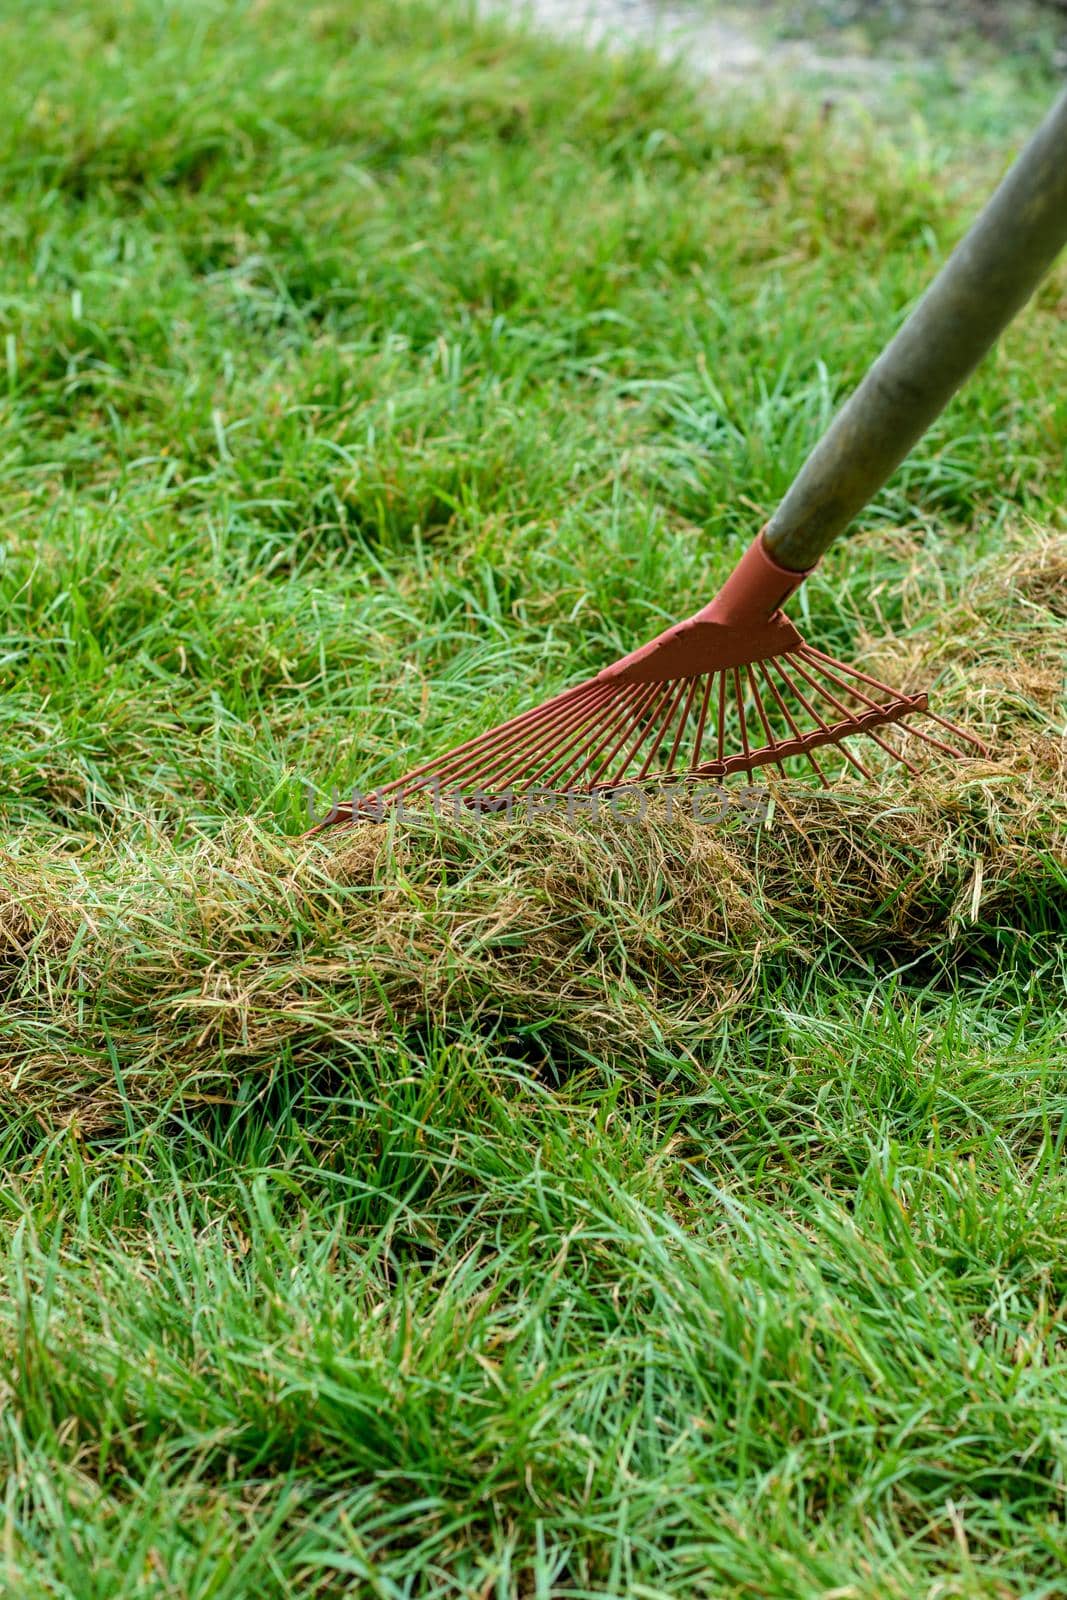 Cleaning of garbage and dry grass from the lawn with a fan rake